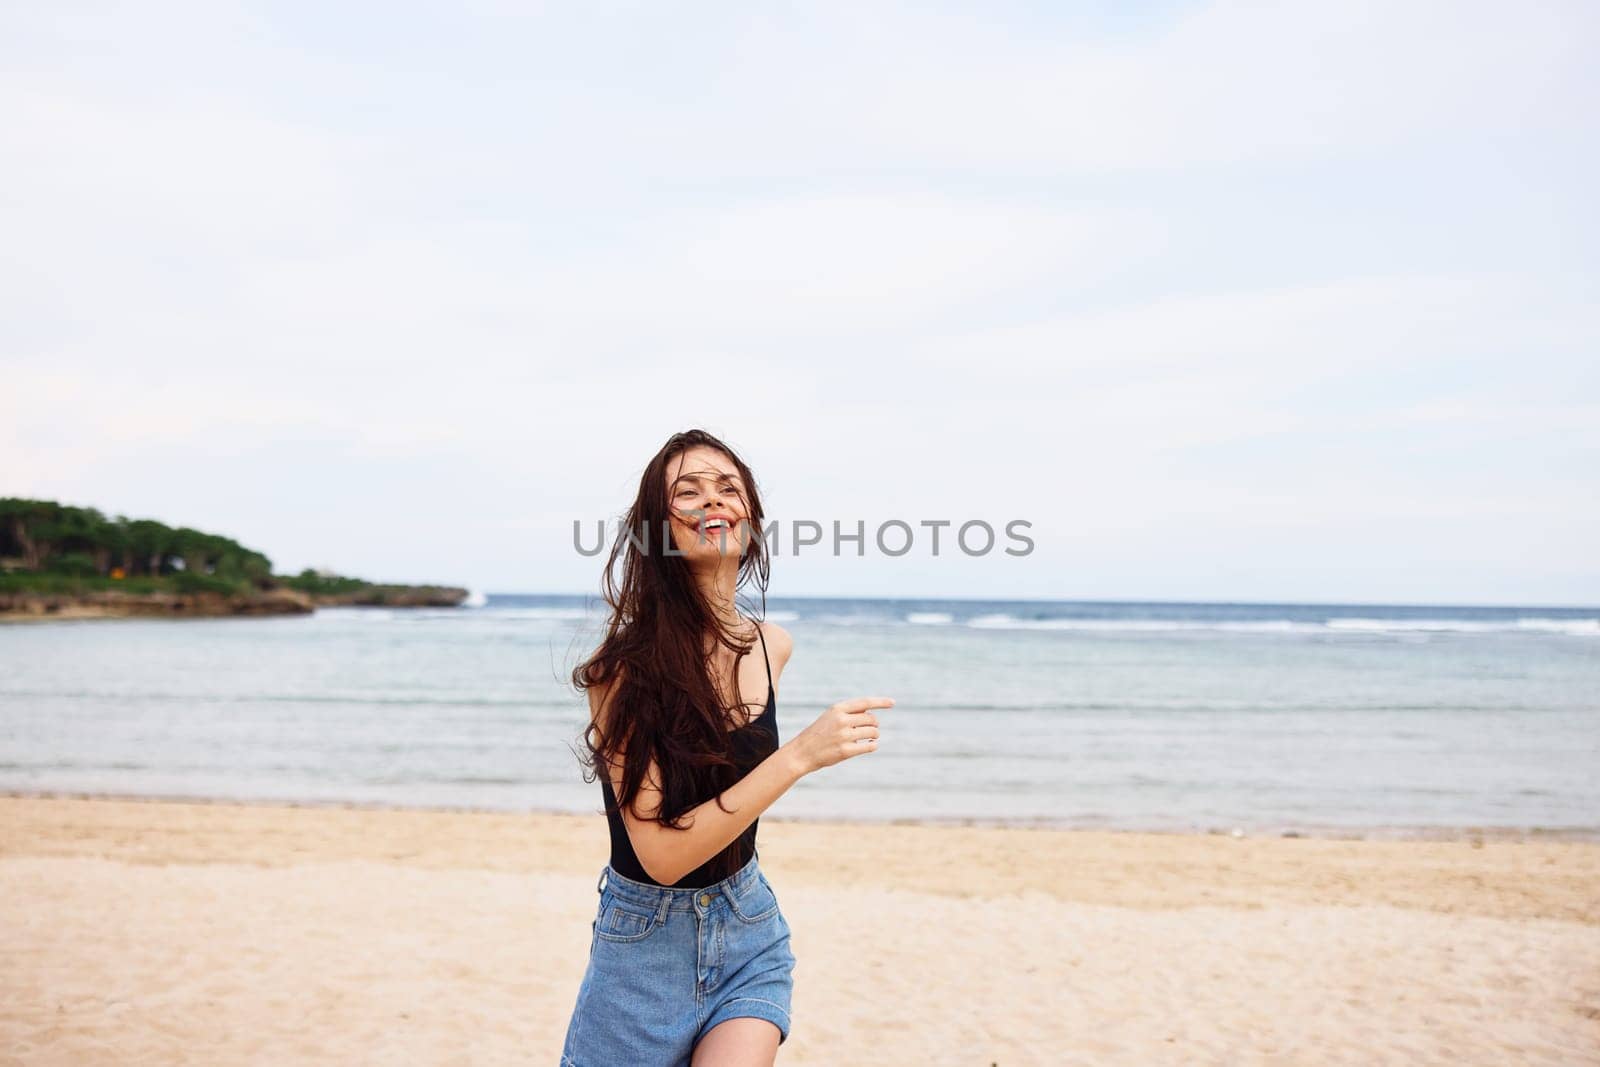 space woman beach female young copy relax smile hair running ocean sea summer body positive sunset lifestyle fun nature shore travel smiling